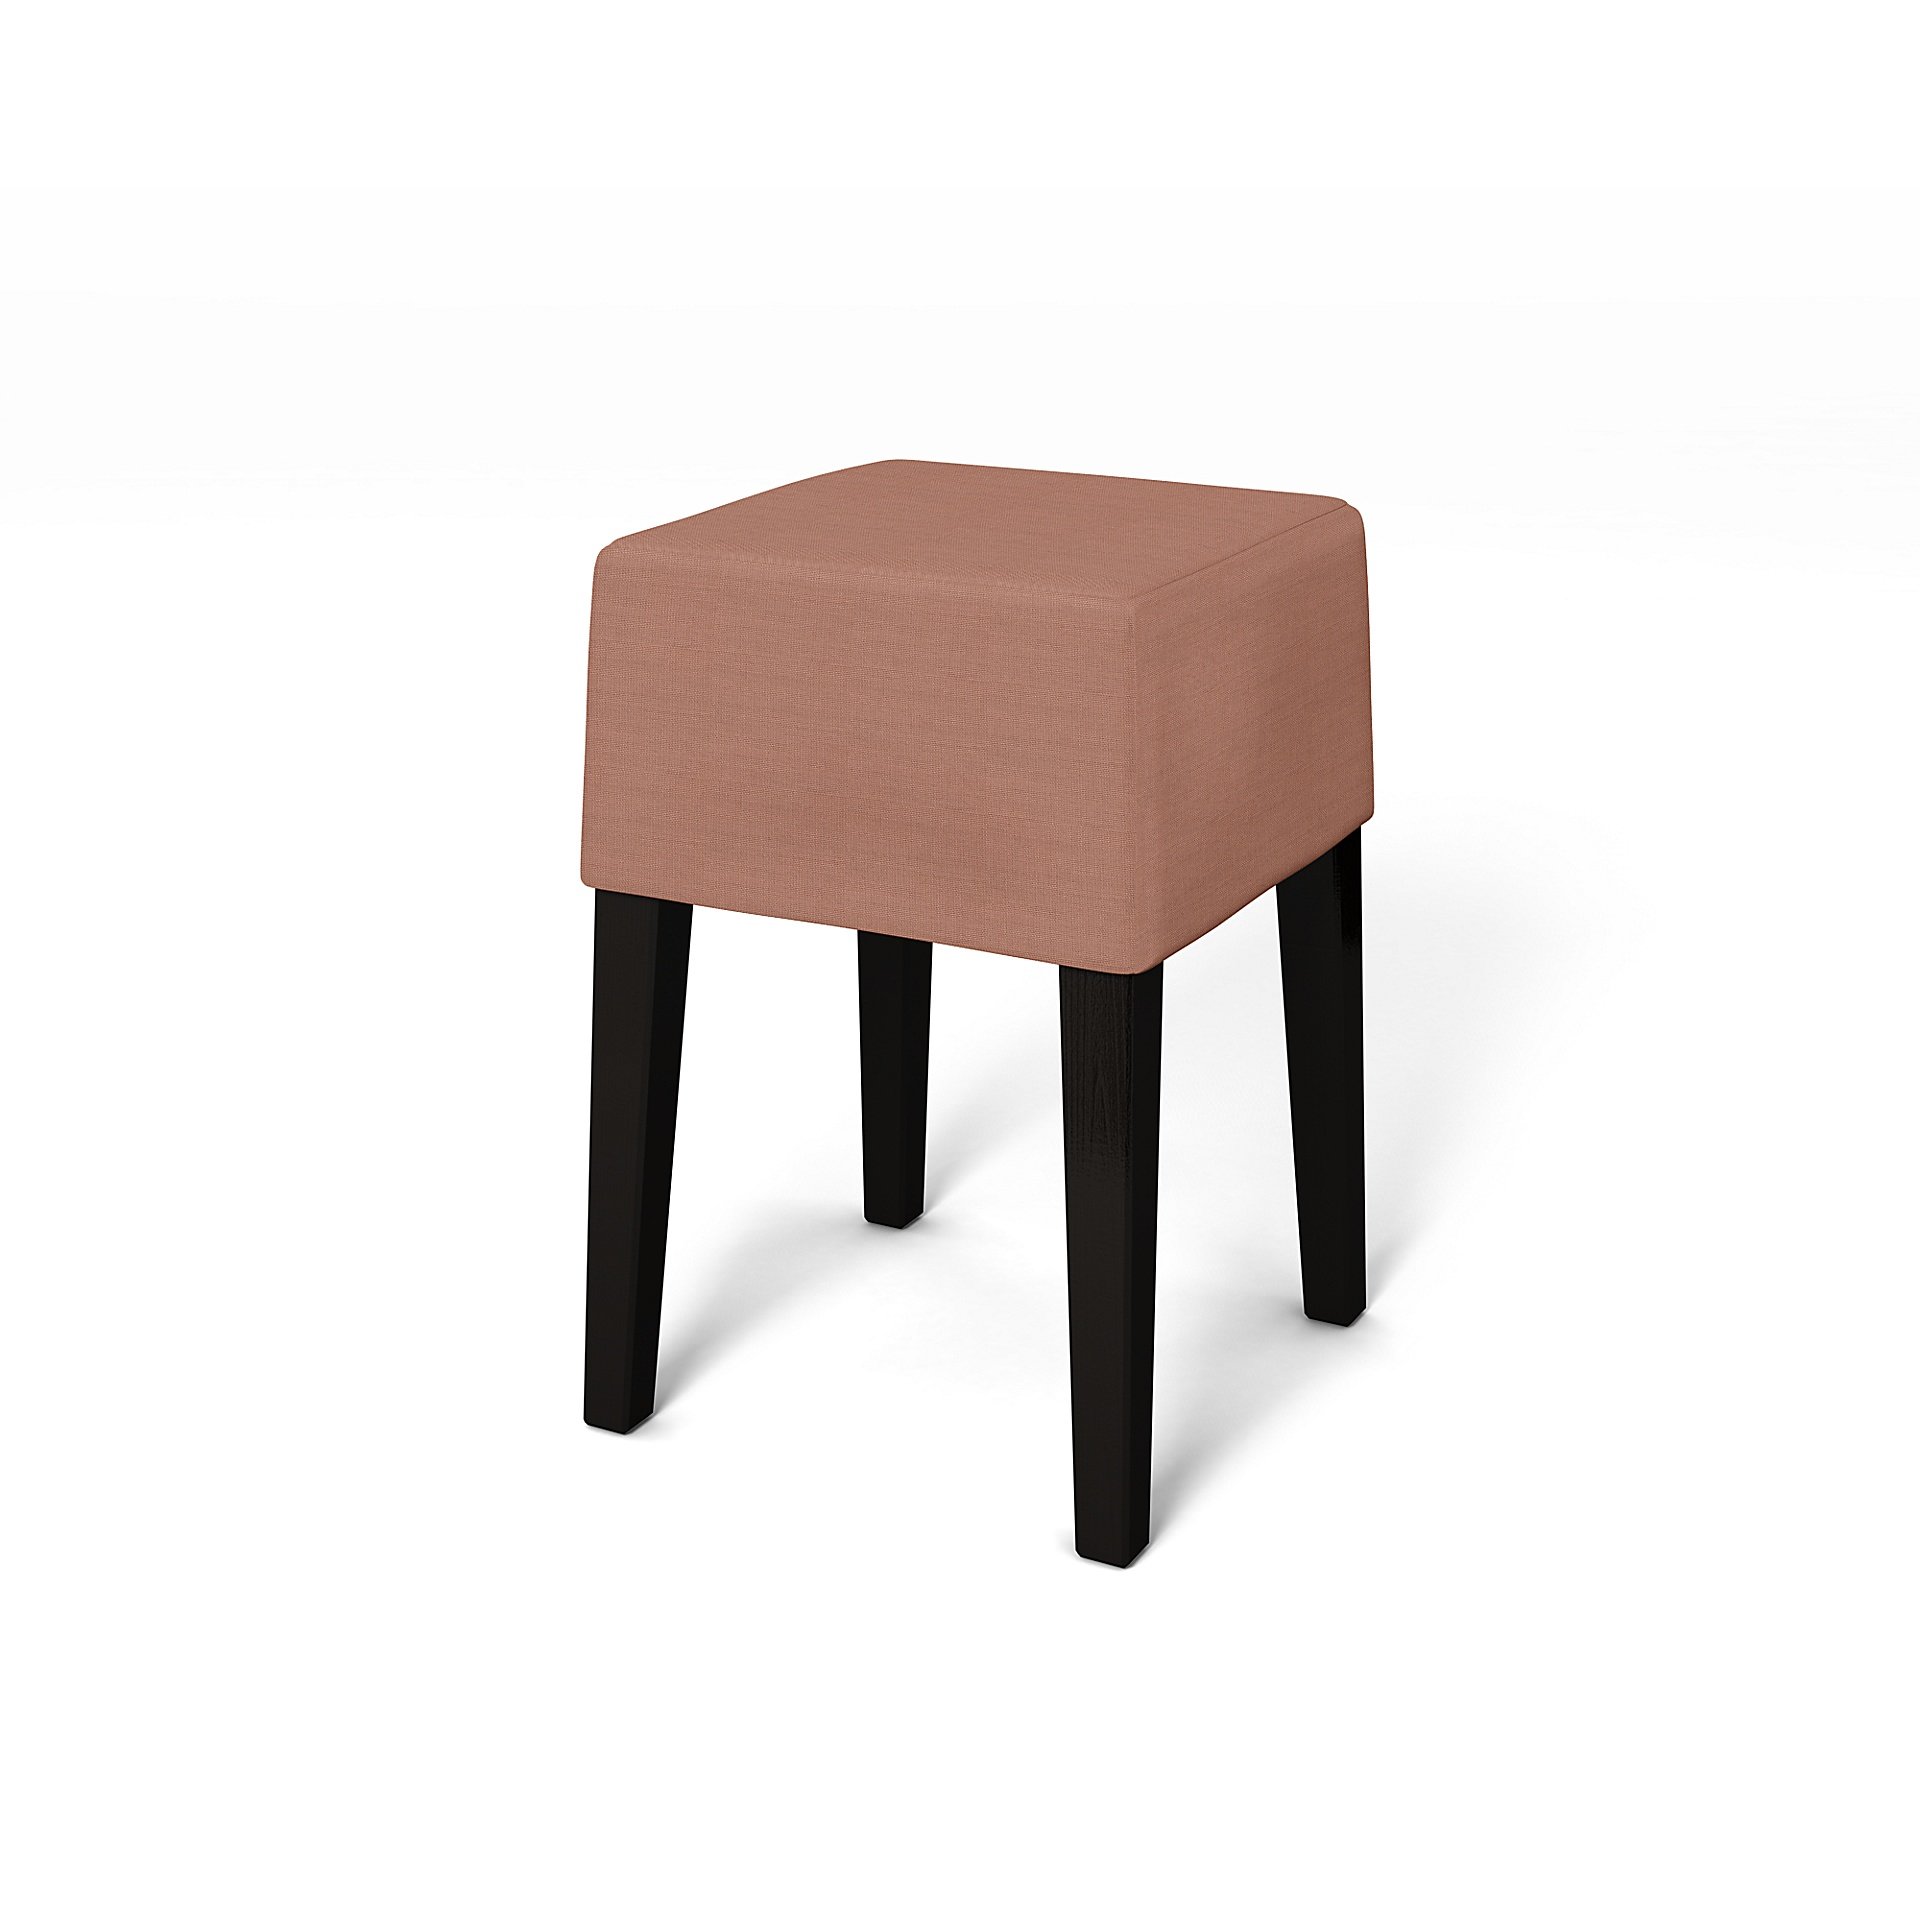 IKEA - Nils Stool Cover, Dusty Pink, Outdoor - Bemz